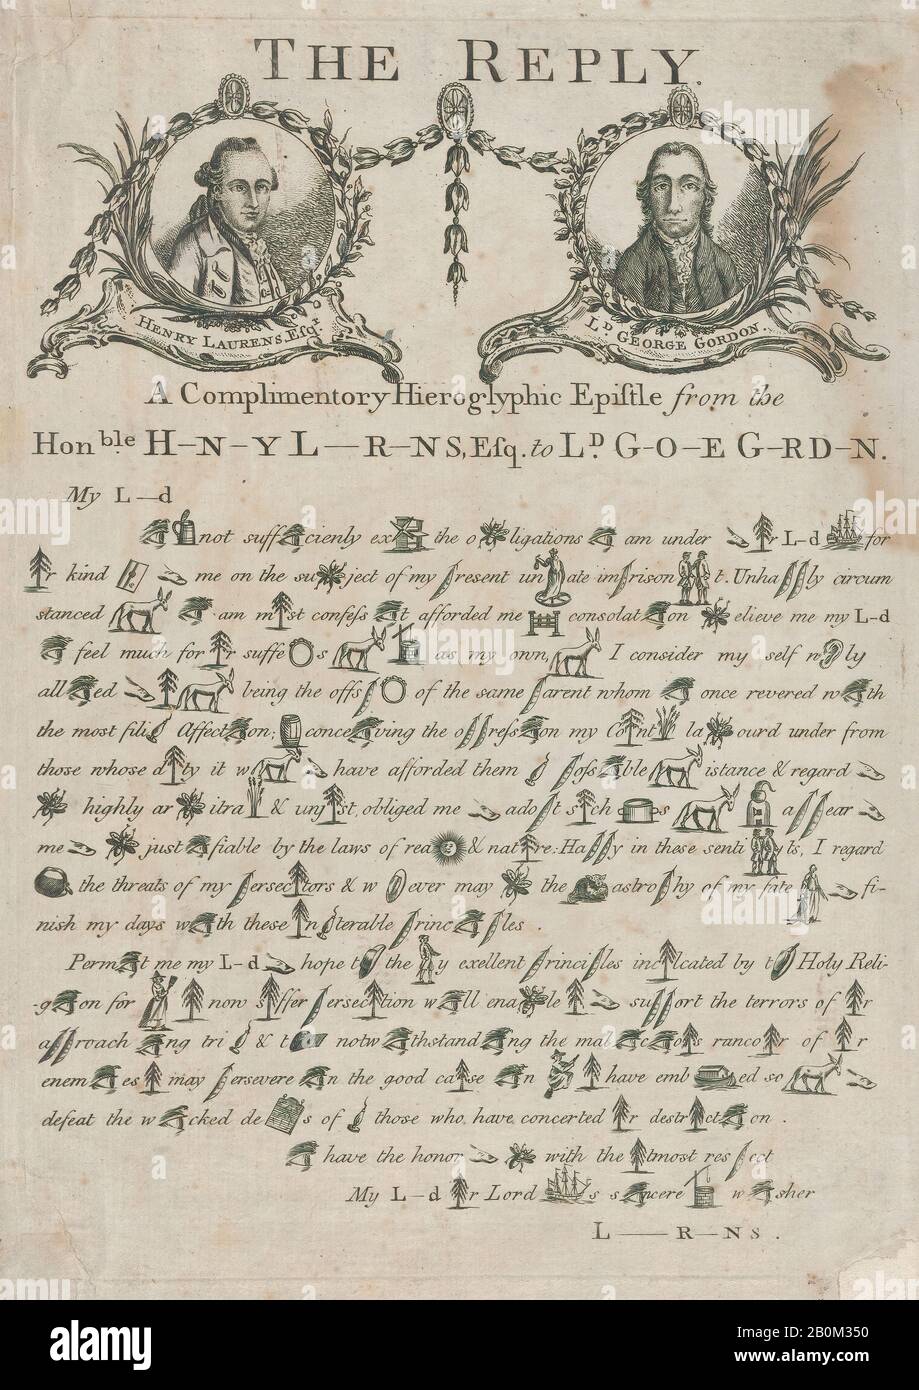 Henry Laurens, The Reply: A Complimentory [sic] Hieroglyphic Epistle from the Honorable Henry Lawrens to Lord George Gordon, Henry Laurens (American, Charleston, South Carolina 1724-173 Charleston, South Carolina), Anonymous, British, 18. Jahrhundert, Kätzing, Platte: 12 3/8 x 8 3/4 in. (31,4 x 22,2 cm), Blatt: 13 x 9 1/4 Zoll (33 x 23,5 cm), Ausdrucke Stockfoto